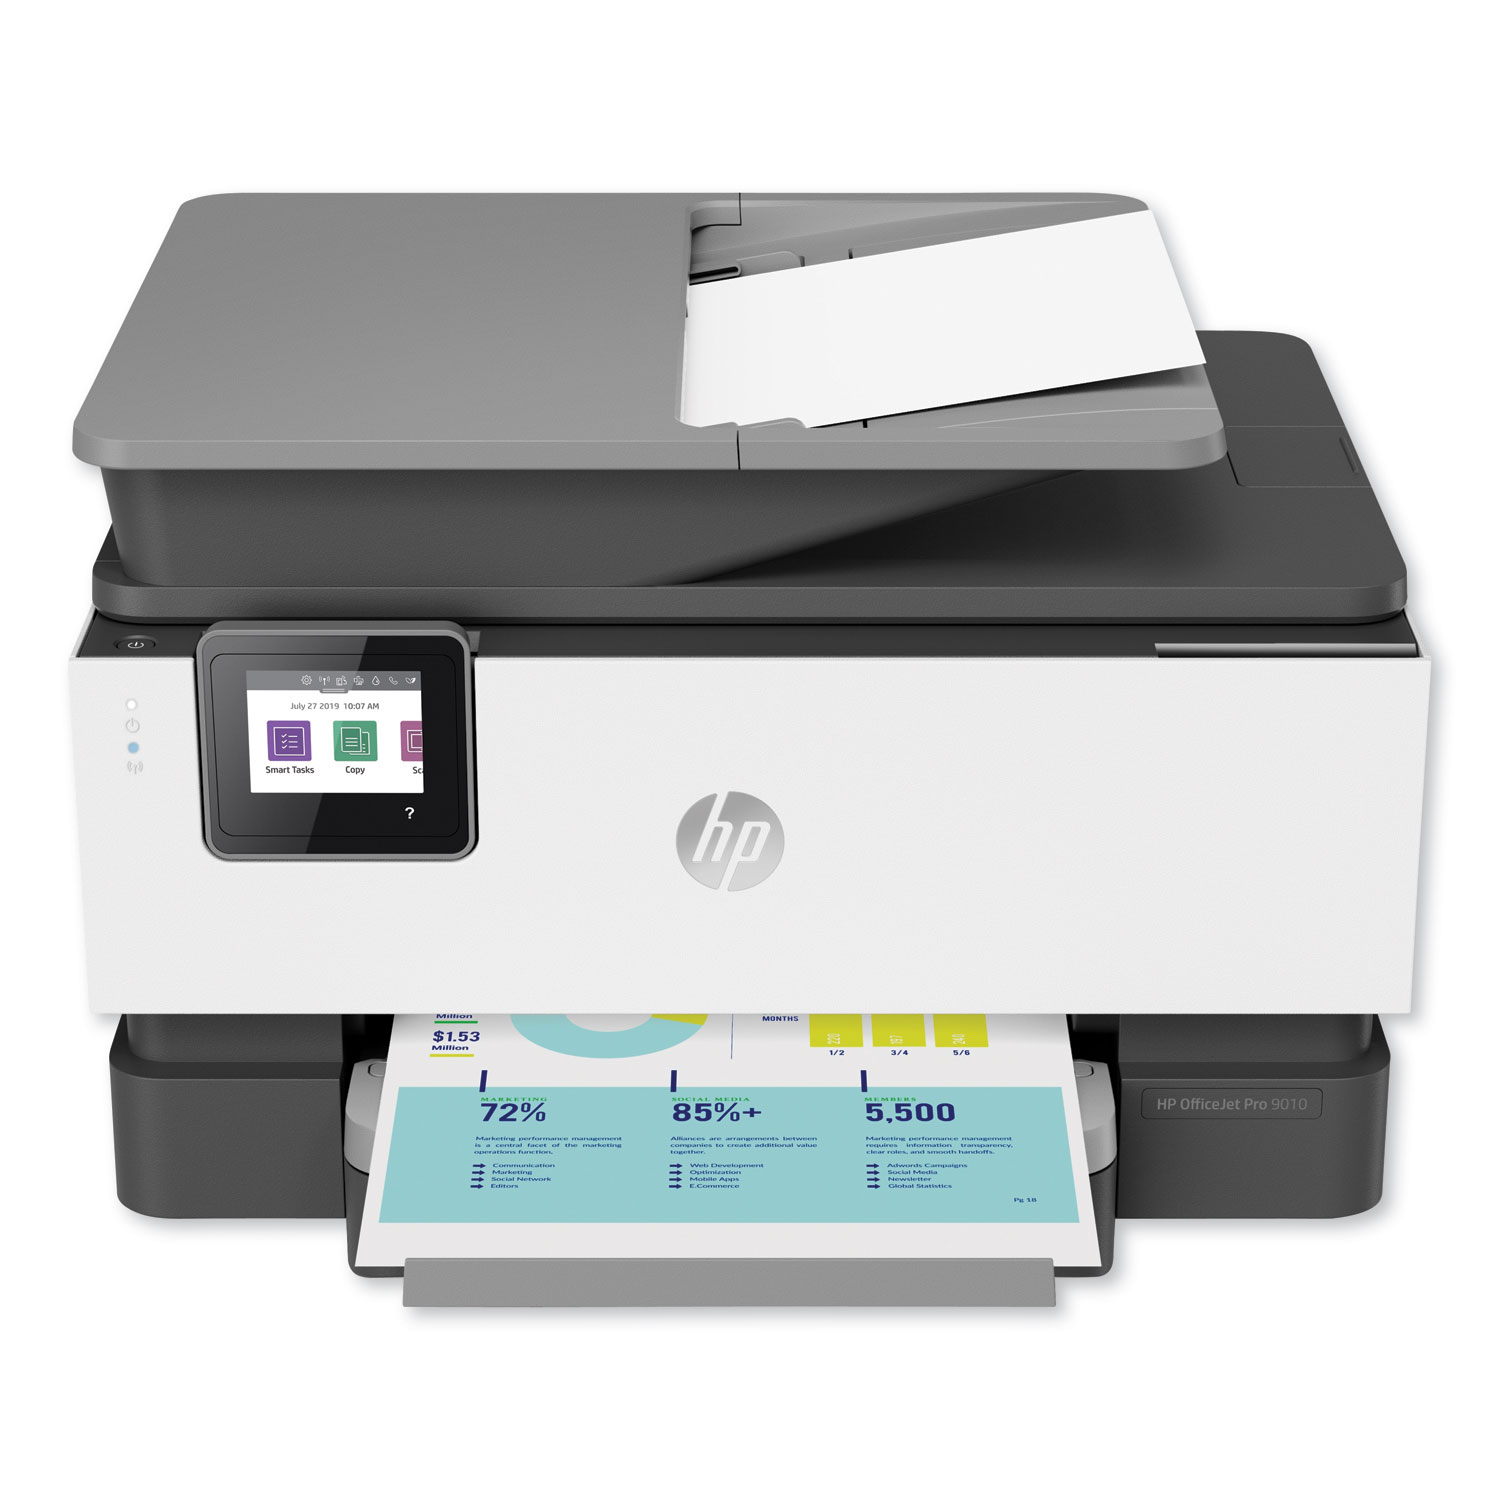  HP 3UK83A#B1H OfficeJet Pro 9010 All-in-One Printer, Copy/Fax/Print/Scan (HEW3UK83A) 